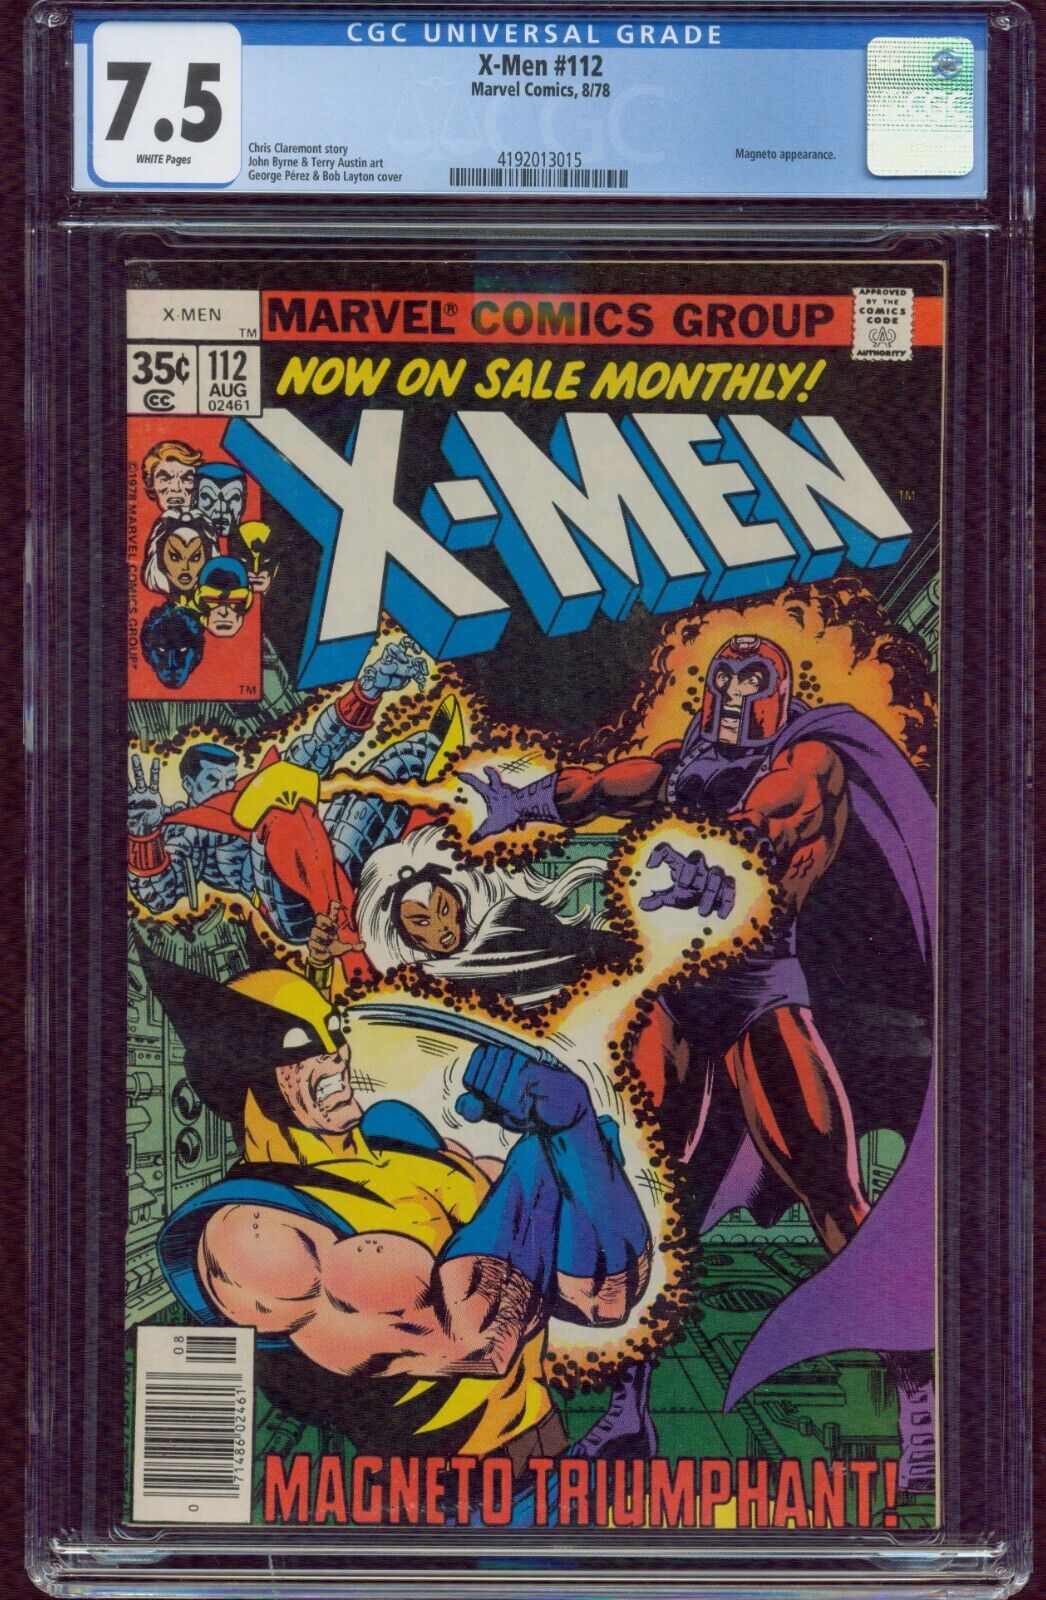 X-MEN #112 CGC 7.5 VERY FINE- NEWSSTAND EDITION MAGNETO APPEARANCE G-911